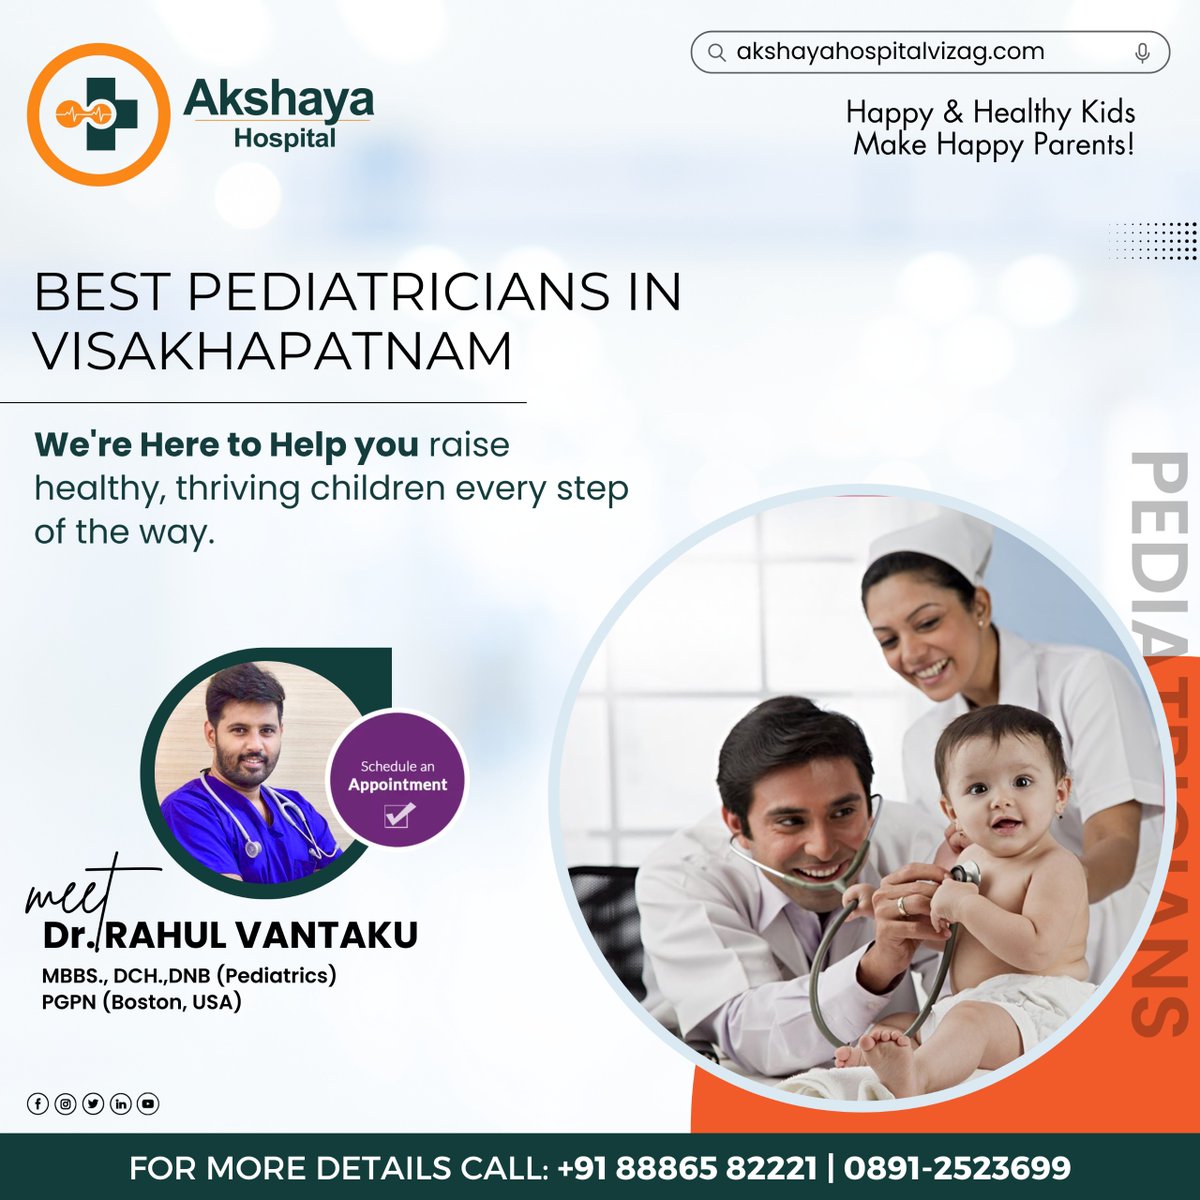 Our top pediatrician, equipped with state-of-the-art facilities, ensure your little ones receive the best care possible.

Consult Now : +91 88865 82221 | 0891-2523699

#AkshayaHospital #BestPediatriccare #BestAdvancedMedicine #BestPediatriciansInVisakhapatnam #BestNewbornCare